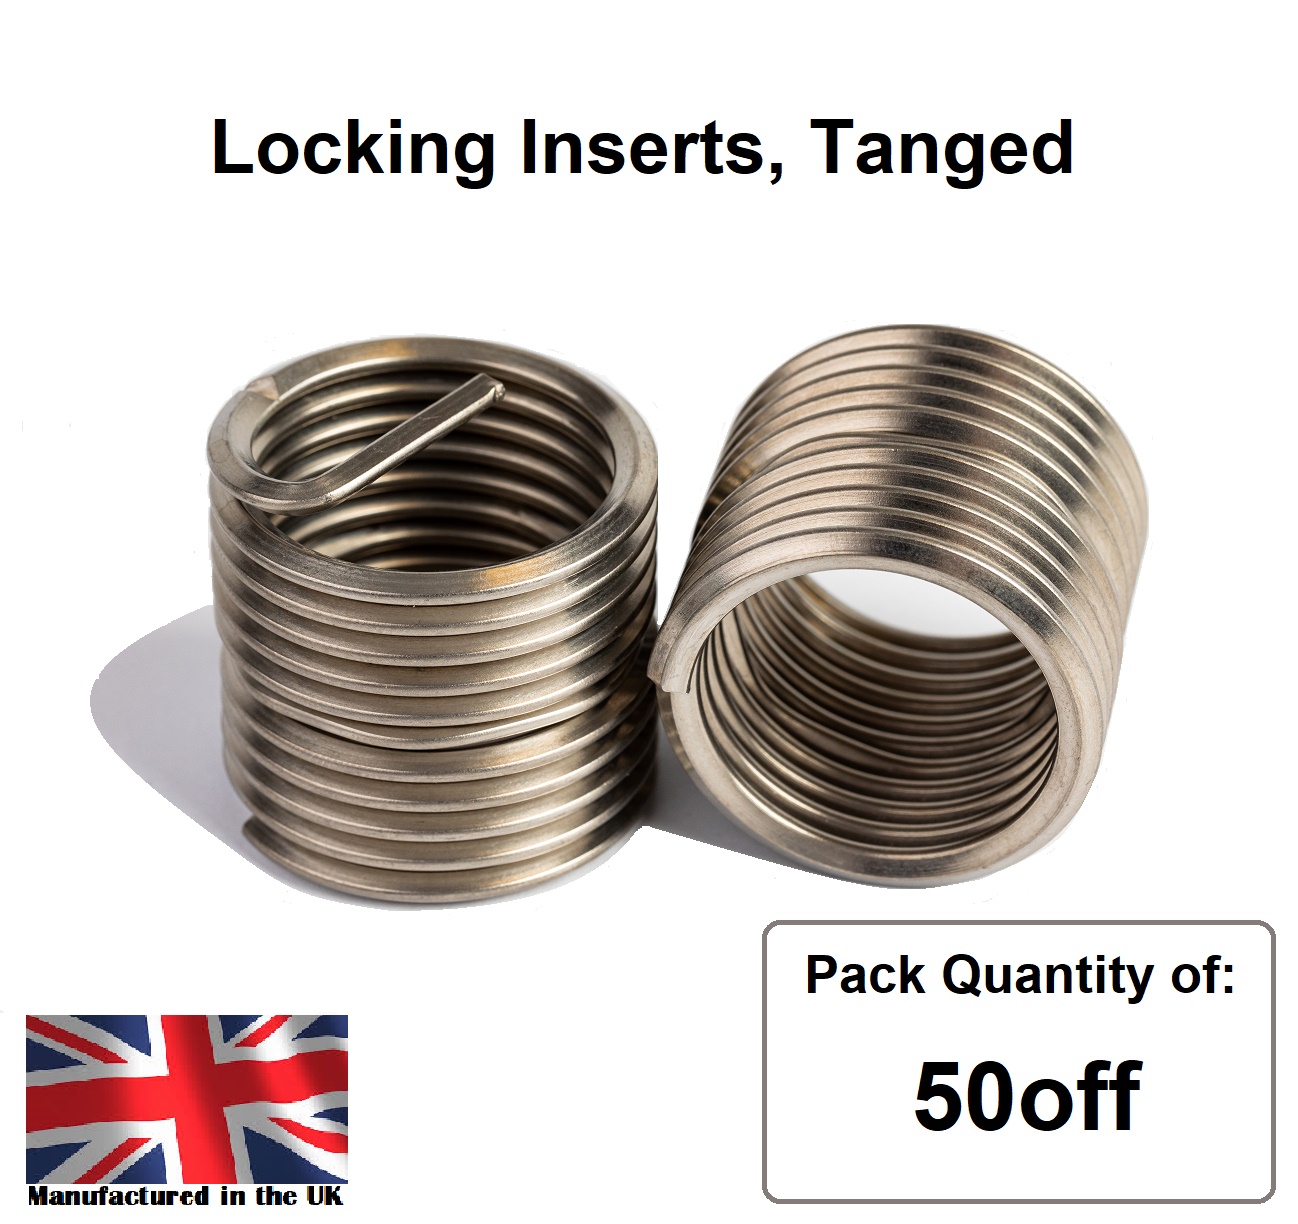 M4 x 0.7 x 1.5D Metric Coarse, LOCKING, Tanged, Wire Thread Repair Insert, 304/A2 Stainless (Pack 50)